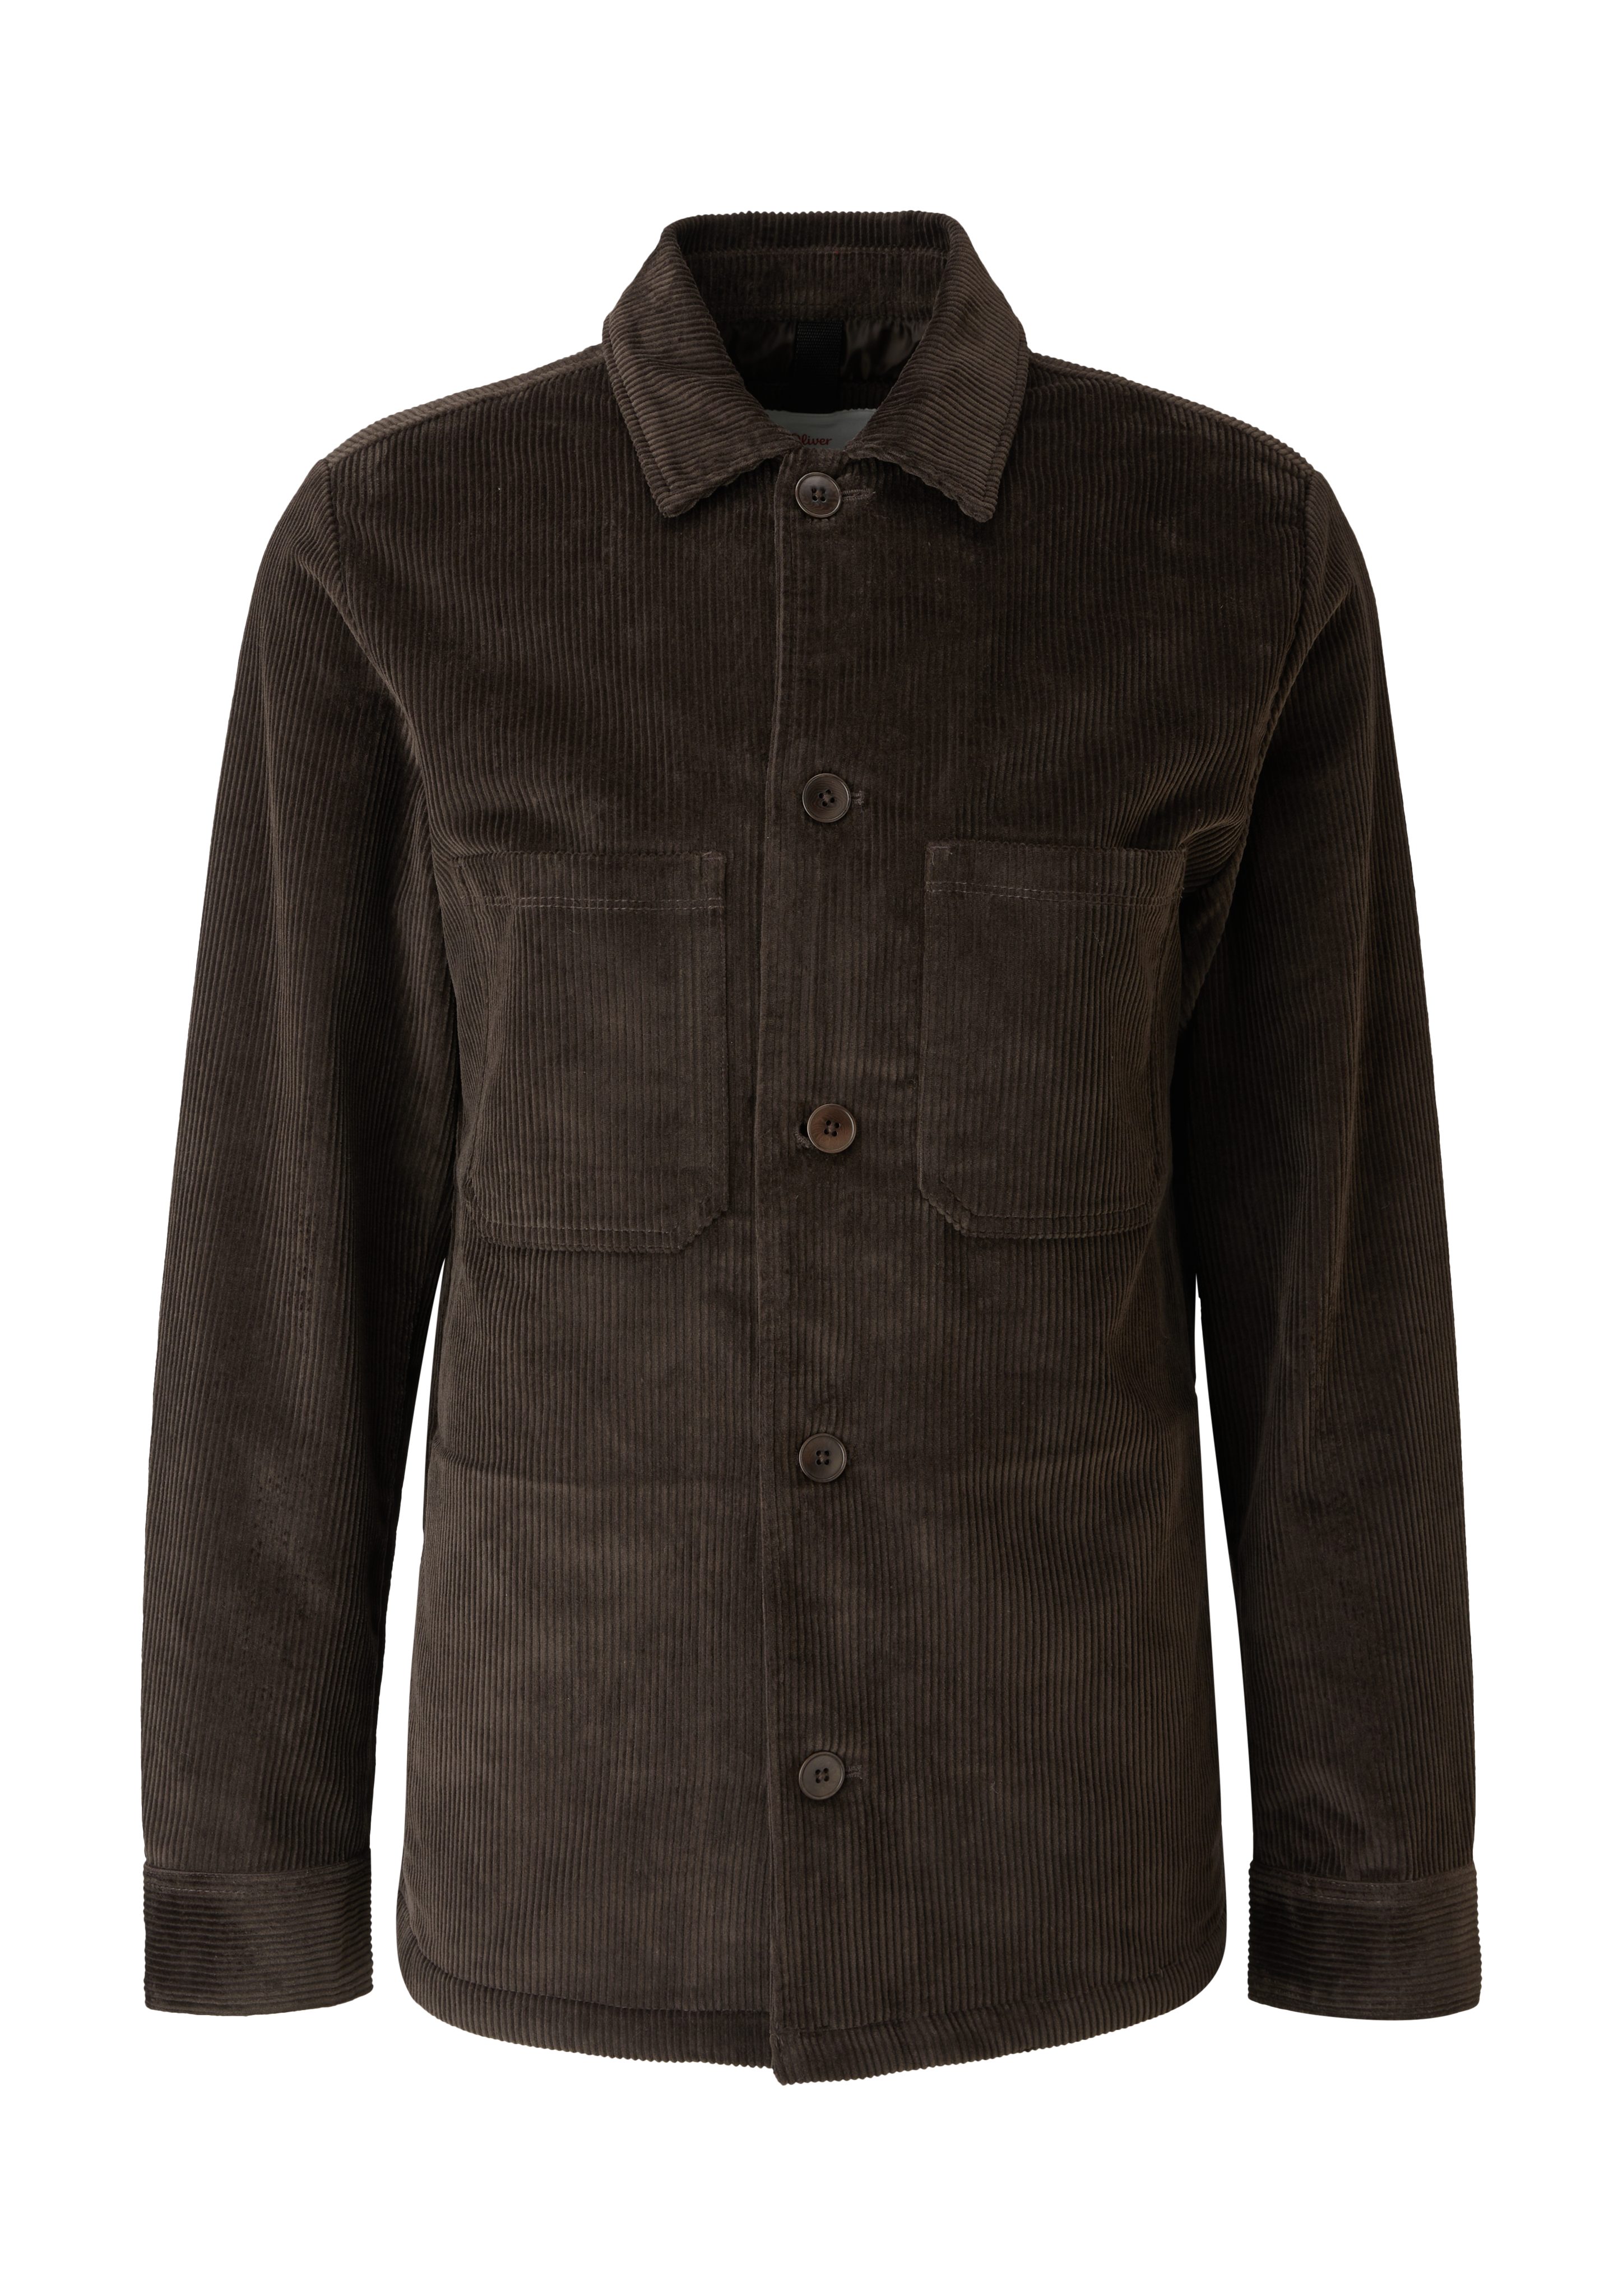 Overshirt Cord s.Oliver aus Outdoorjacke brown